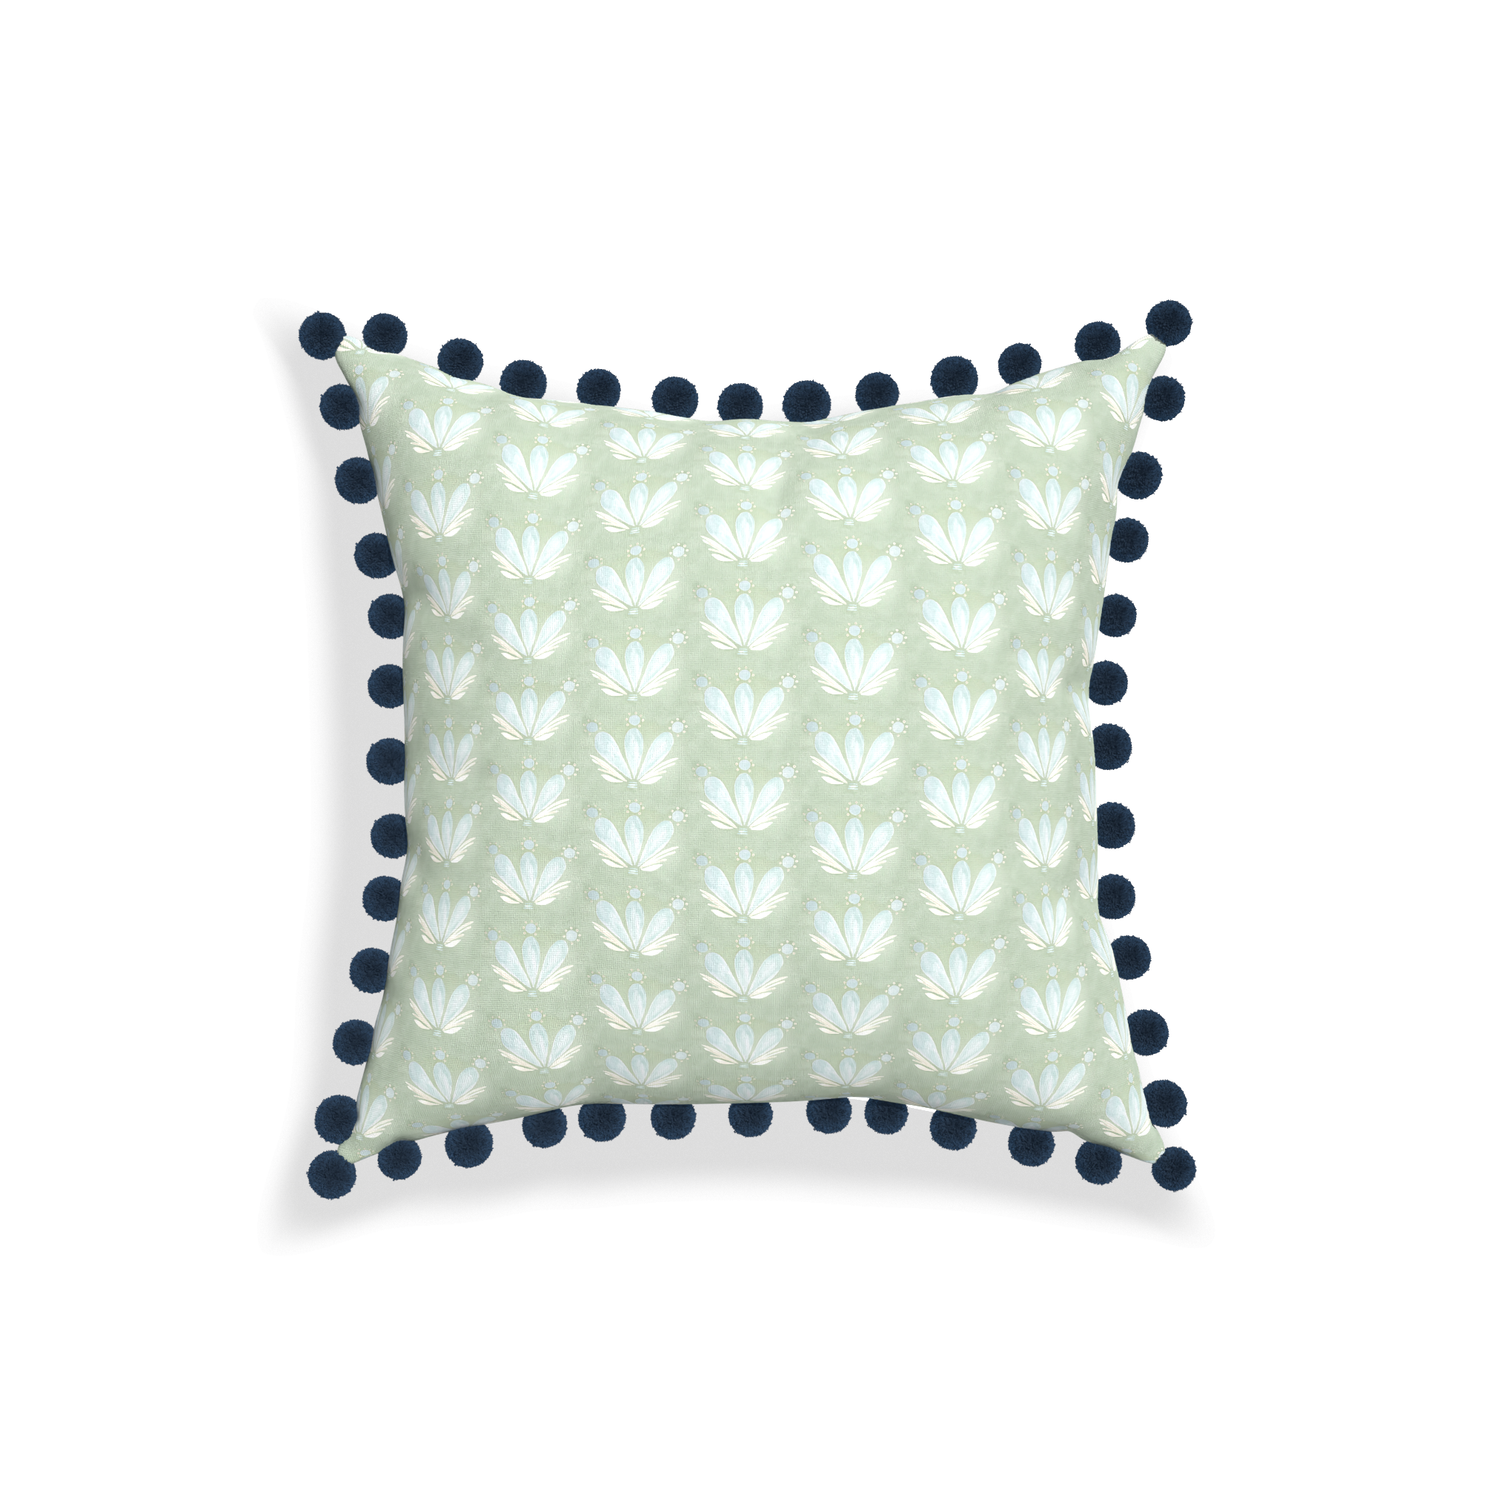 18-square serena sea salt custom blue & green floral drop repeatpillow with c on white background